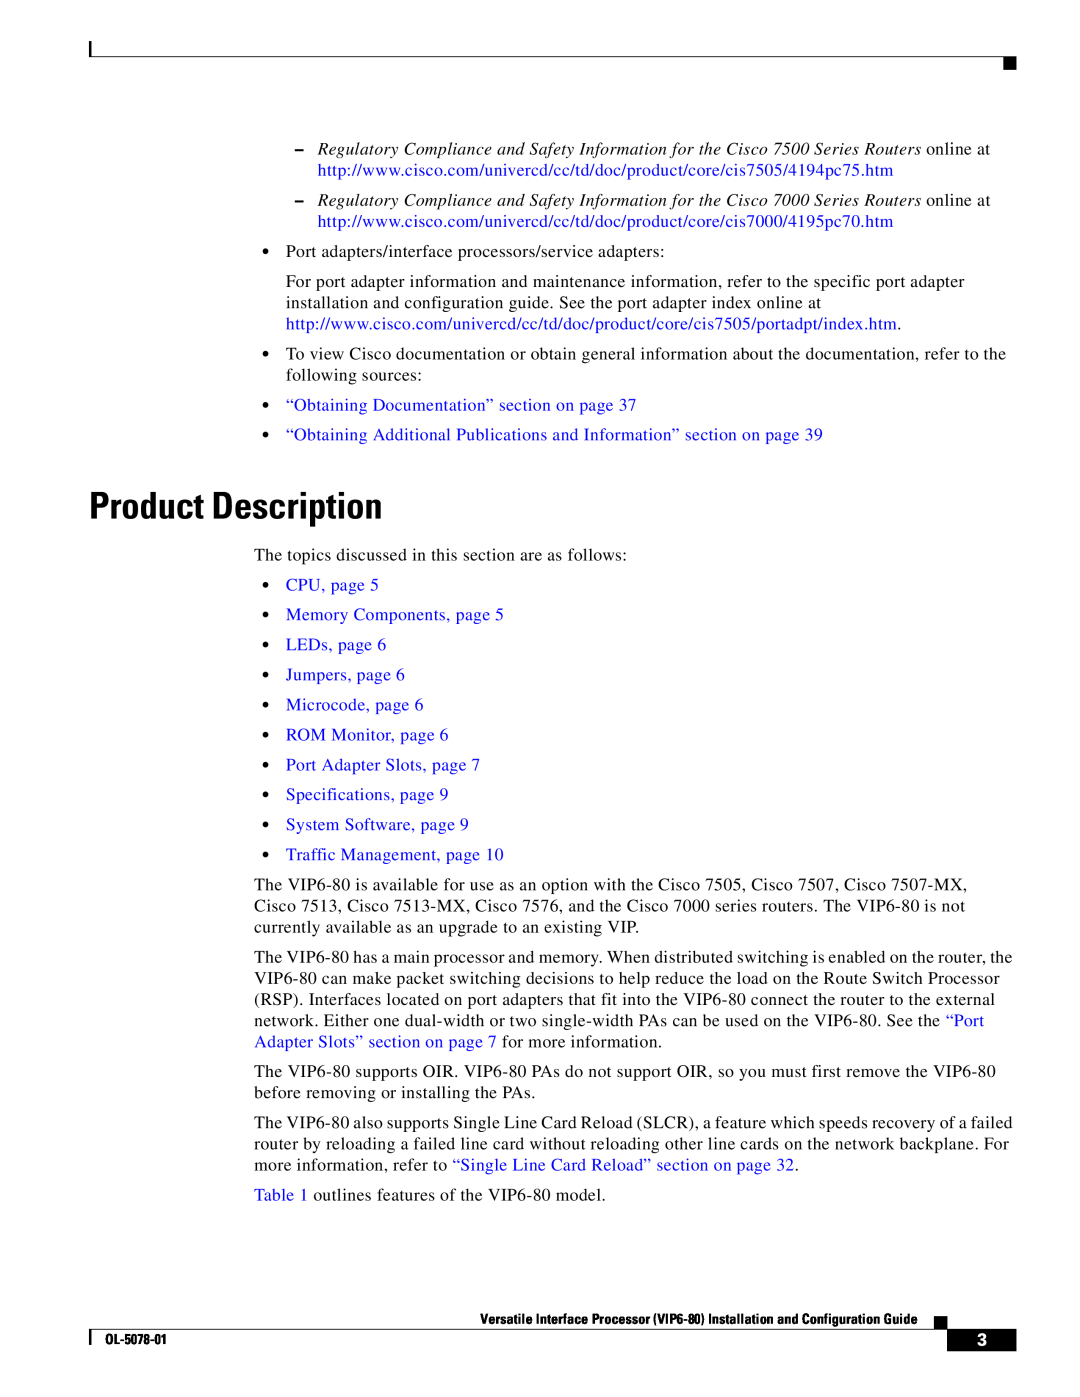 Cisco Systems (VIP6-80) manual Product Description, “Obtaining Documentation” section on page 